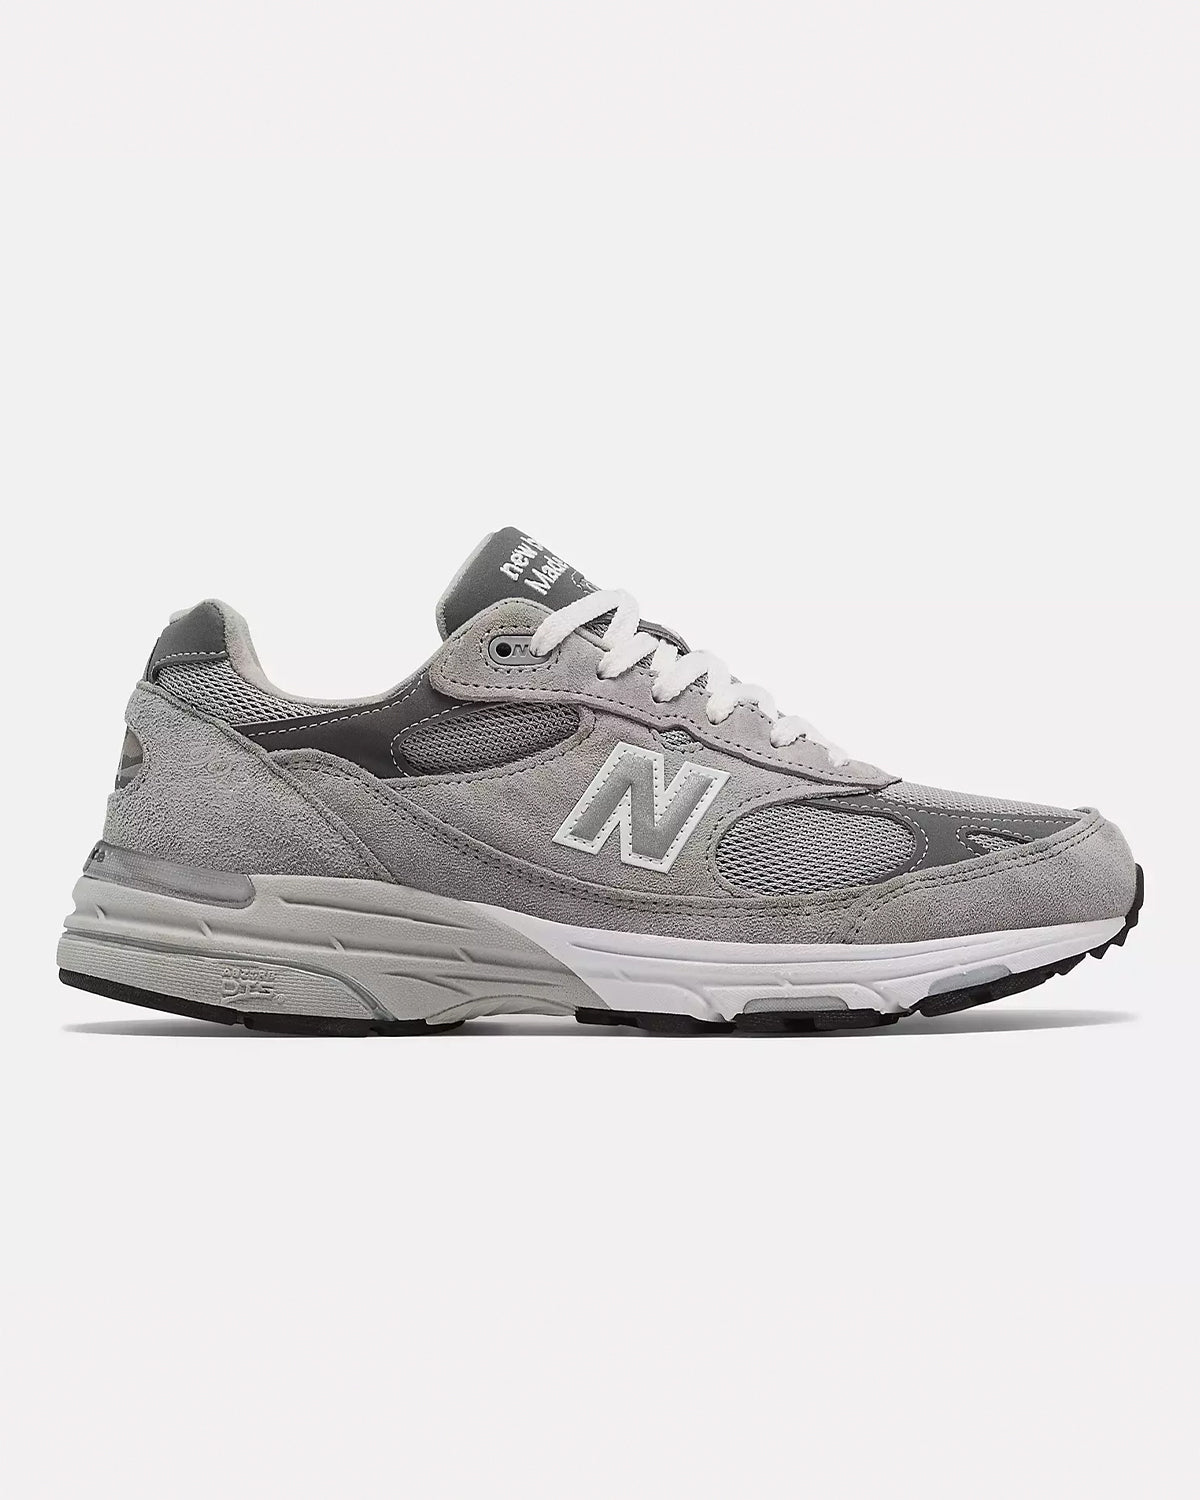 New Balance 993 GL Grey Shoes Sneakers Men